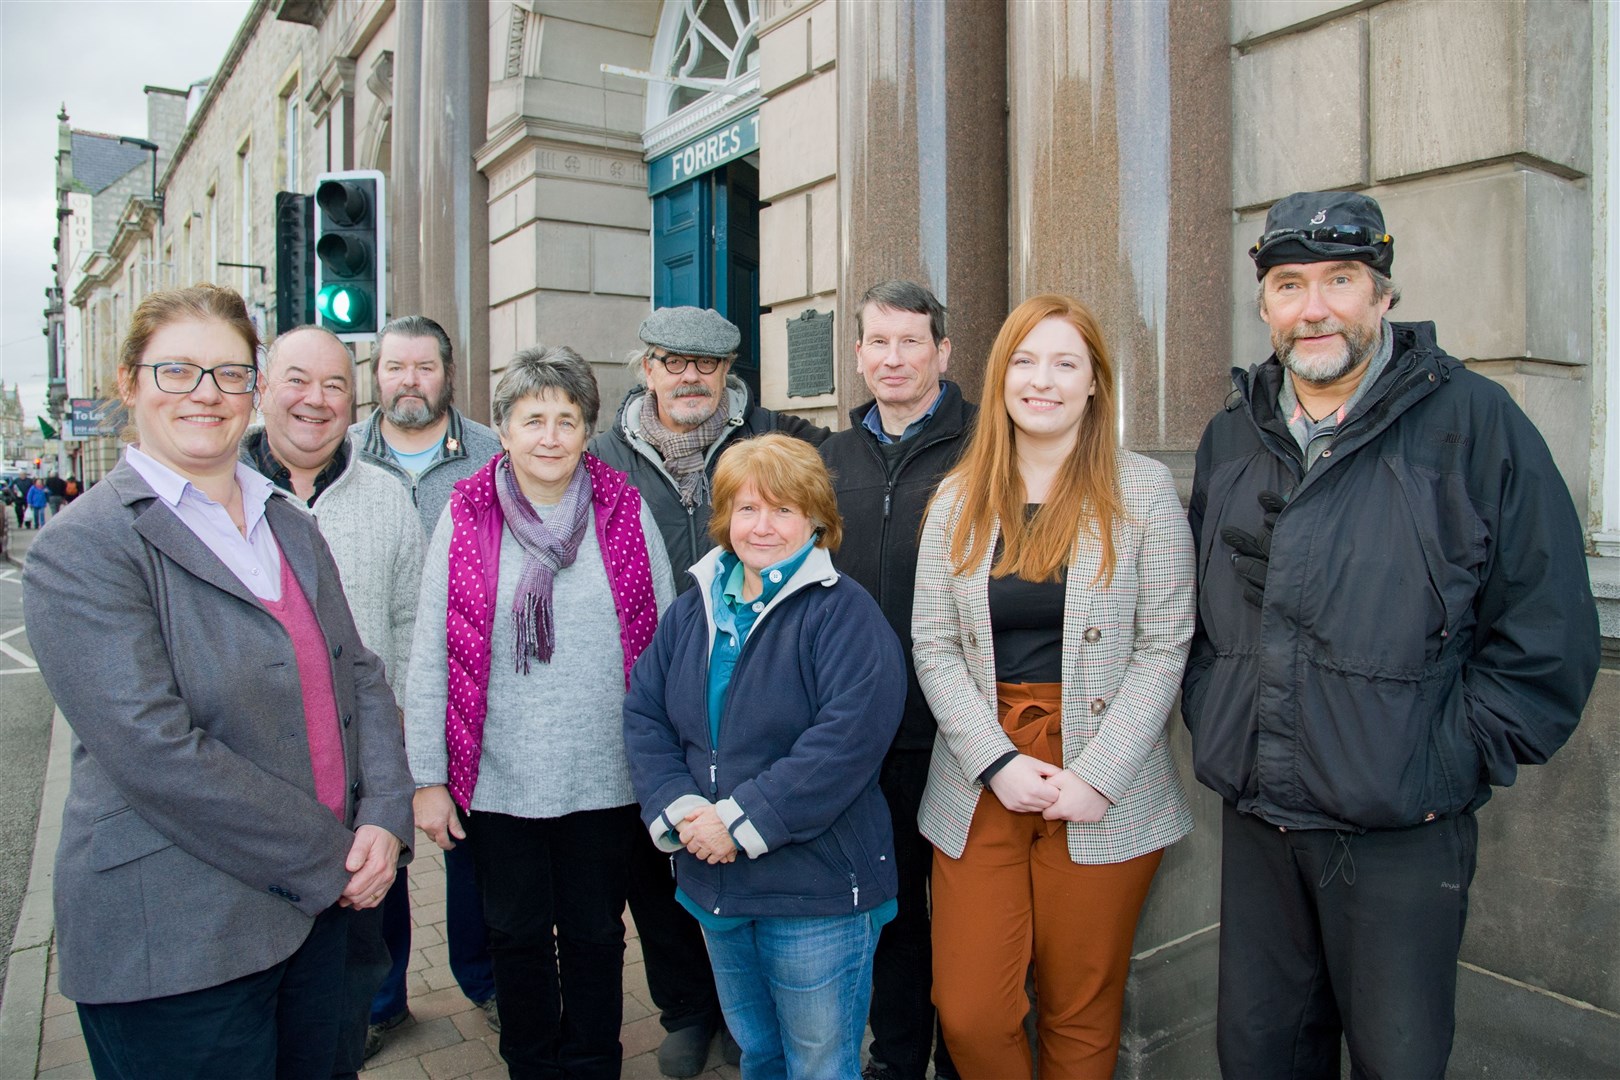 Volunteers and supporters of the Forres Town Hall before lockdown.